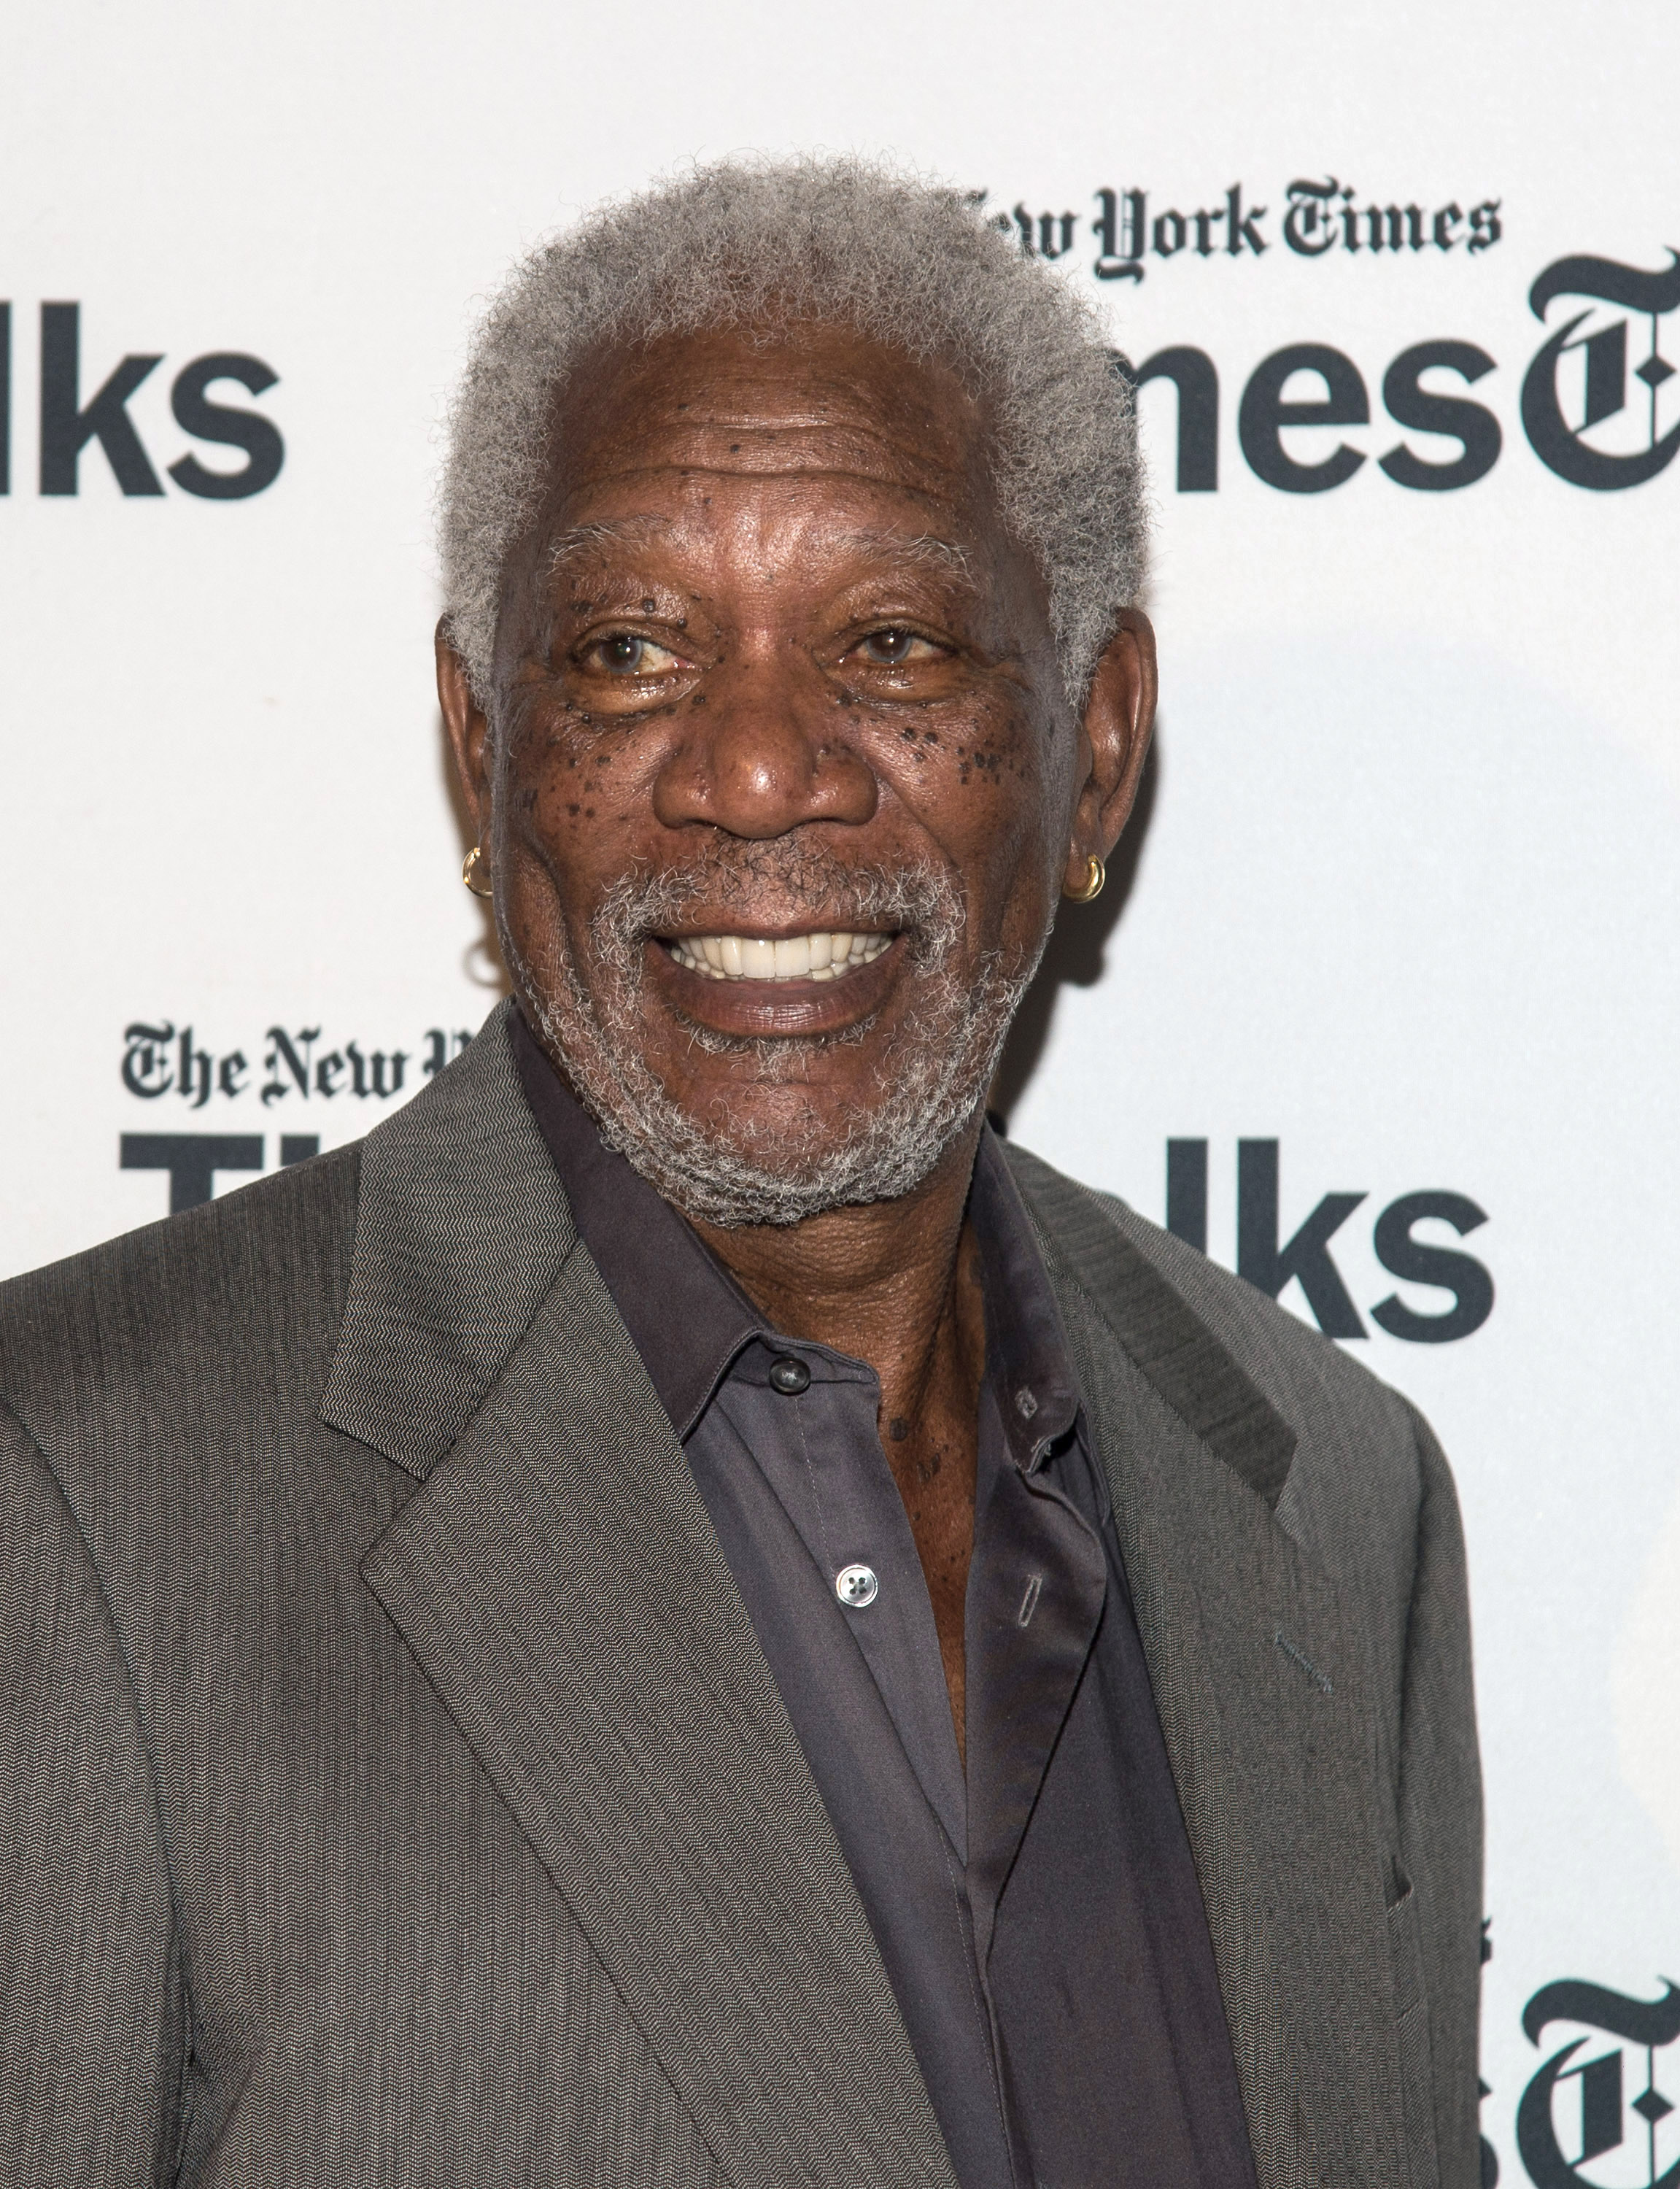 Morgan Freeman attends the Times Talks Presents: An Evening With The Cast Of "Madame Secretary" at Haft Auditorium at FIT on September 29, 2015 in New York City. (Debra L Rothenberg&mdash;Getty Images)